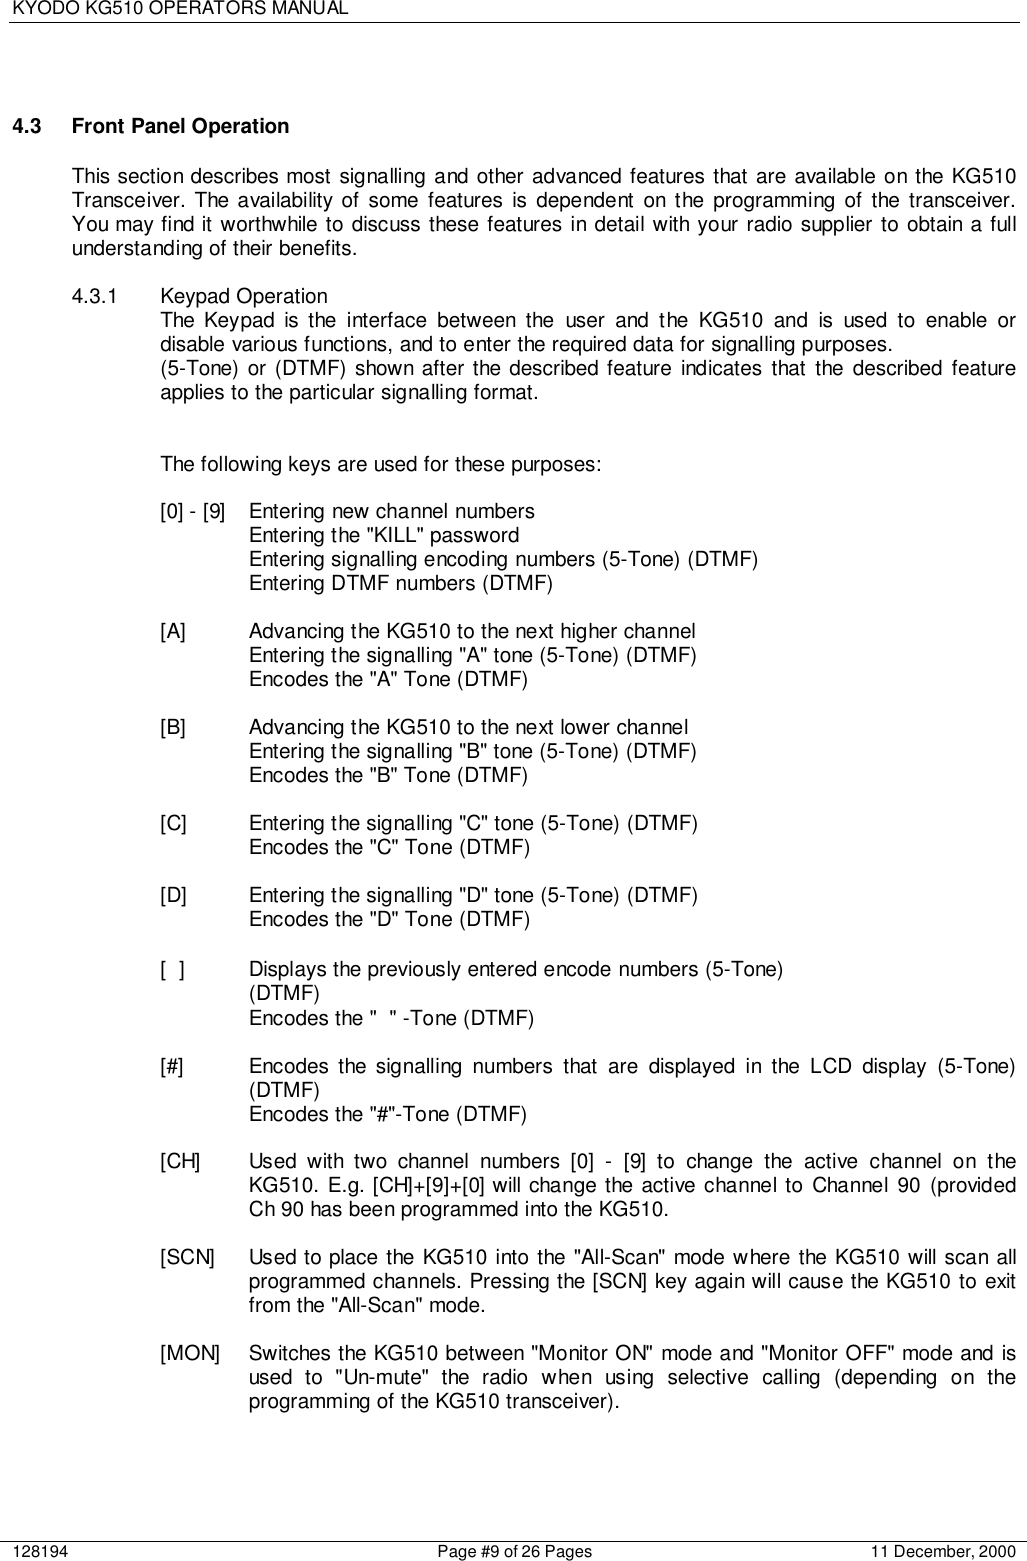 KYODO KG510 OPERATORS MANUAL128194 Page #9 of 26 Pages 11 December, 20004.3  Front Panel OperationThis section describes most signalling and other advanced features that are available on the KG510Transceiver. The availability of some features is dependent on the programming of the transceiver.You may find it worthwhile to discuss these features in detail with your radio supplier to obtain a fullunderstanding of their benefits.4.3.1 Keypad OperationThe Keypad is the interface between the user and the KG510 and is used to enable ordisable various functions, and to enter the required data for signalling purposes.(5-Tone) or (DTMF) shown after the described feature indicates that the described featureapplies to the particular signalling format.The following keys are used for these purposes:[0] - [9] Entering new channel numbersEntering the &quot;KILL&quot; passwordEntering signalling encoding numbers (5-Tone) (DTMF)Entering DTMF numbers (DTMF)[A] Advancing the KG510 to the next higher channelEntering the signalling &quot;A&quot; tone (5-Tone) (DTMF)Encodes the &quot;A&quot; Tone (DTMF)[B] Advancing the KG510 to the next lower channelEntering the signalling &quot;B&quot; tone (5-Tone) (DTMF)Encodes the &quot;B&quot; Tone (DTMF)[C] Entering the signalling &quot;C&quot; tone (5-Tone) (DTMF)Encodes the &quot;C&quot; Tone (DTMF)[D] Entering the signalling &quot;D&quot; tone (5-Tone) (DTMF)Encodes the &quot;D&quot; Tone (DTMF)[ ] Displays the previously entered encode numbers (5-Tone)(DTMF)Encodes the &quot; &quot; -Tone (DTMF)[#] Encodes the signalling numbers that are displayed in the LCD display (5-Tone)(DTMF)Encodes the &quot;#&quot;-Tone (DTMF)[CH] Used with two channel numbers [0] - [9] to change the active channel on theKG510. E.g. [CH]+[9]+[0] will change the active channel to Channel 90 (providedCh 90 has been programmed into the KG510.[SCN] Used to place the KG510 into the &quot;All-Scan&quot; mode where the KG510 will scan allprogrammed channels. Pressing the [SCN] key again will cause the KG510 to exitfrom the &quot;All-Scan&quot; mode.[MON] Switches the KG510 between &quot;Monitor ON&quot; mode and &quot;Monitor OFF&quot; mode and isused to &quot;Un-mute&quot; the radio when using selective calling (depending on theprogramming of the KG510 transceiver).